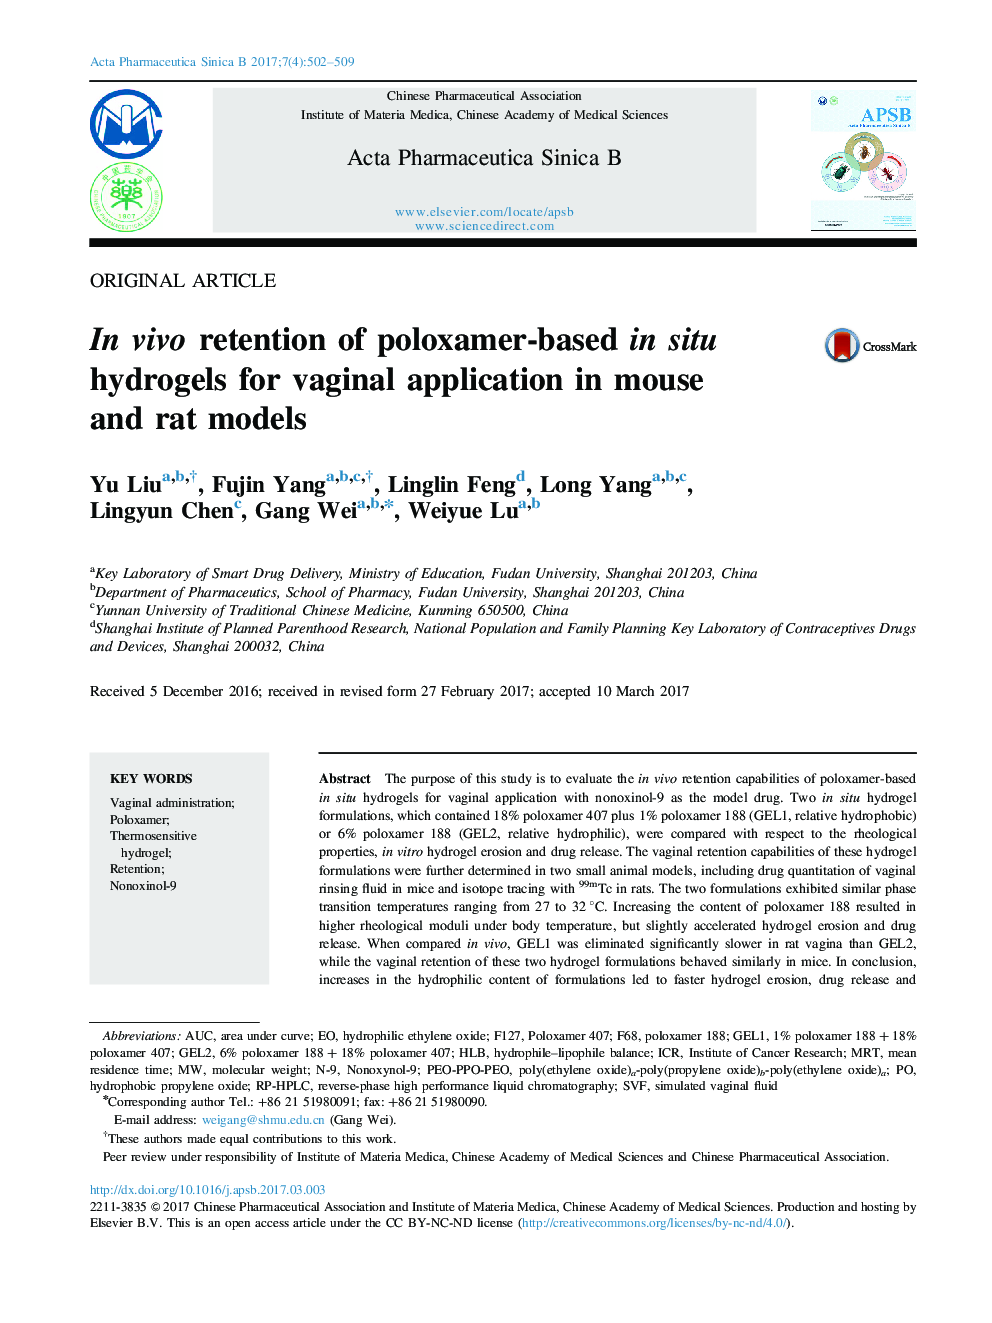 In vivo retention of poloxamer-based in situ hydrogels for vaginal application in mouse and rat models